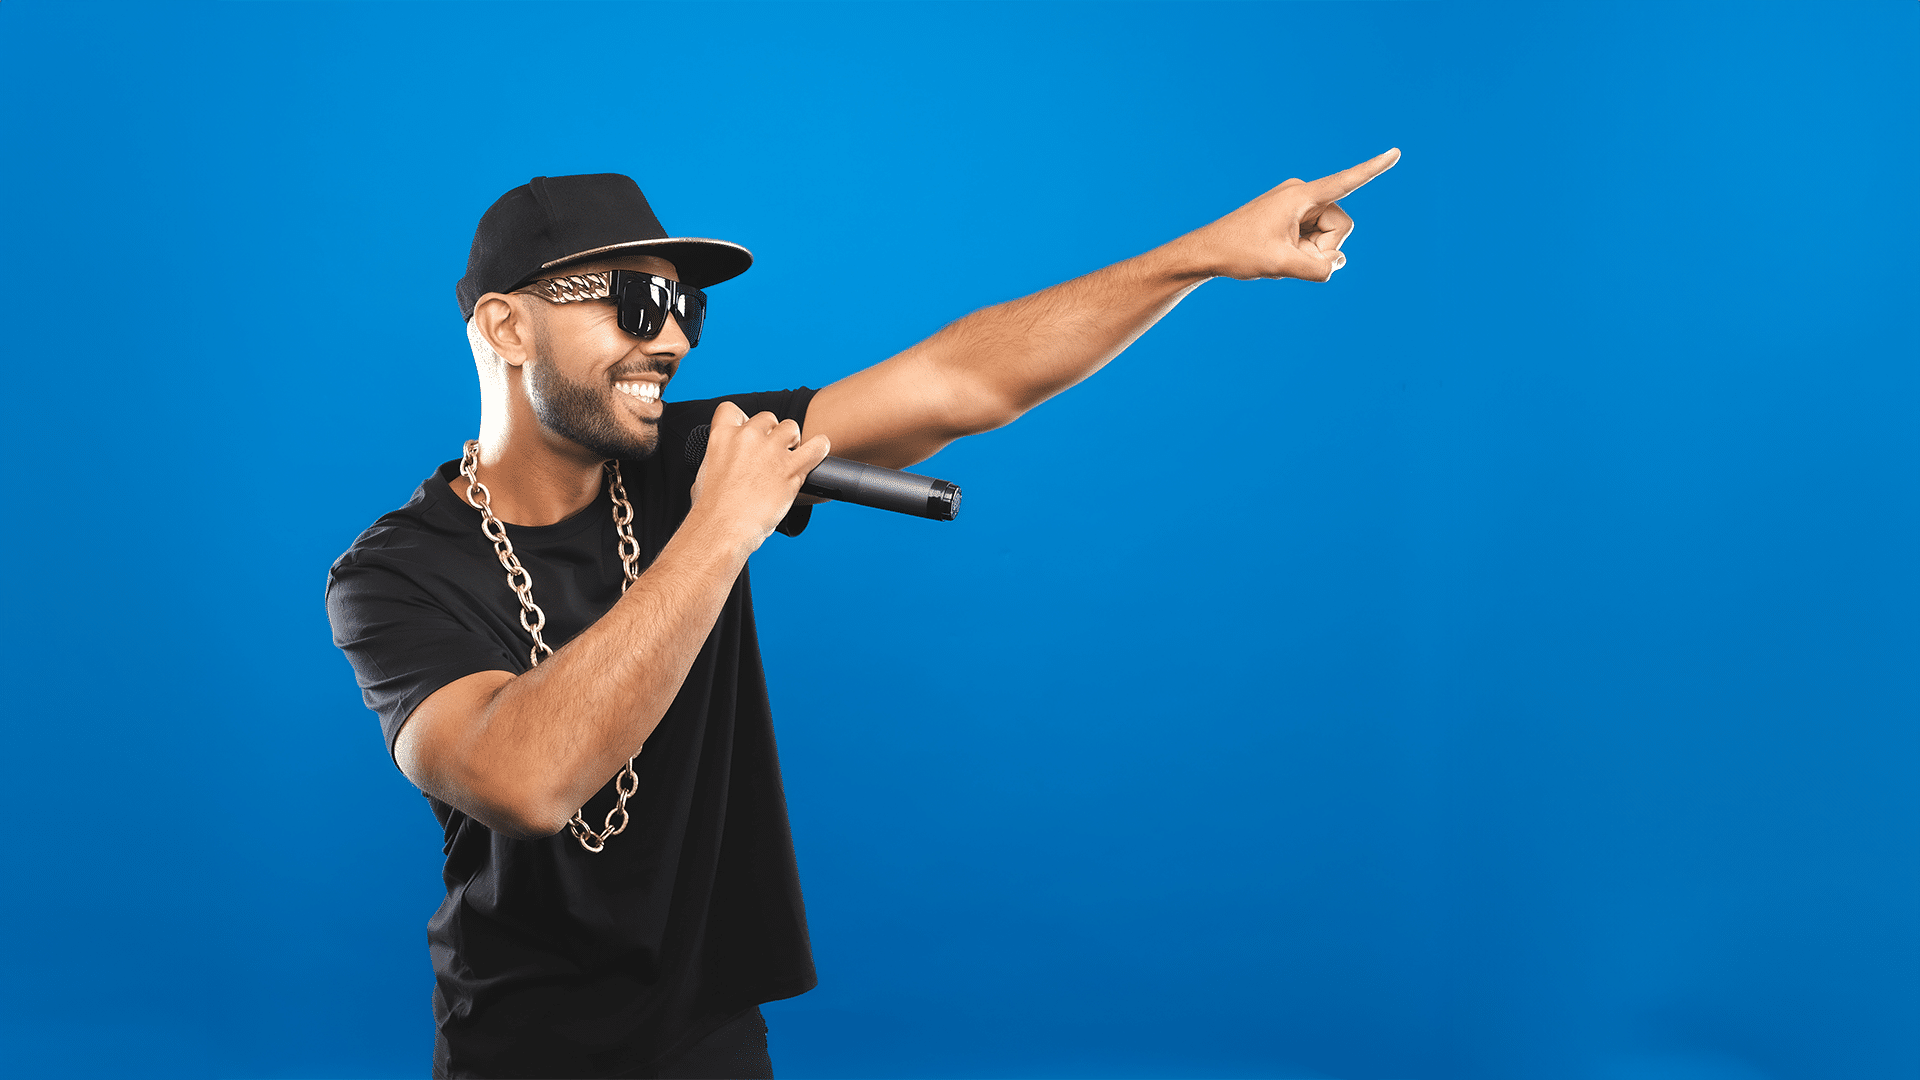 MC Grammar promotional artwork. Blue background. MC Grammar holds a microphone to his smile and points off-camera, wearing a black t-shirt, gold chain necklace and black baseball cap.